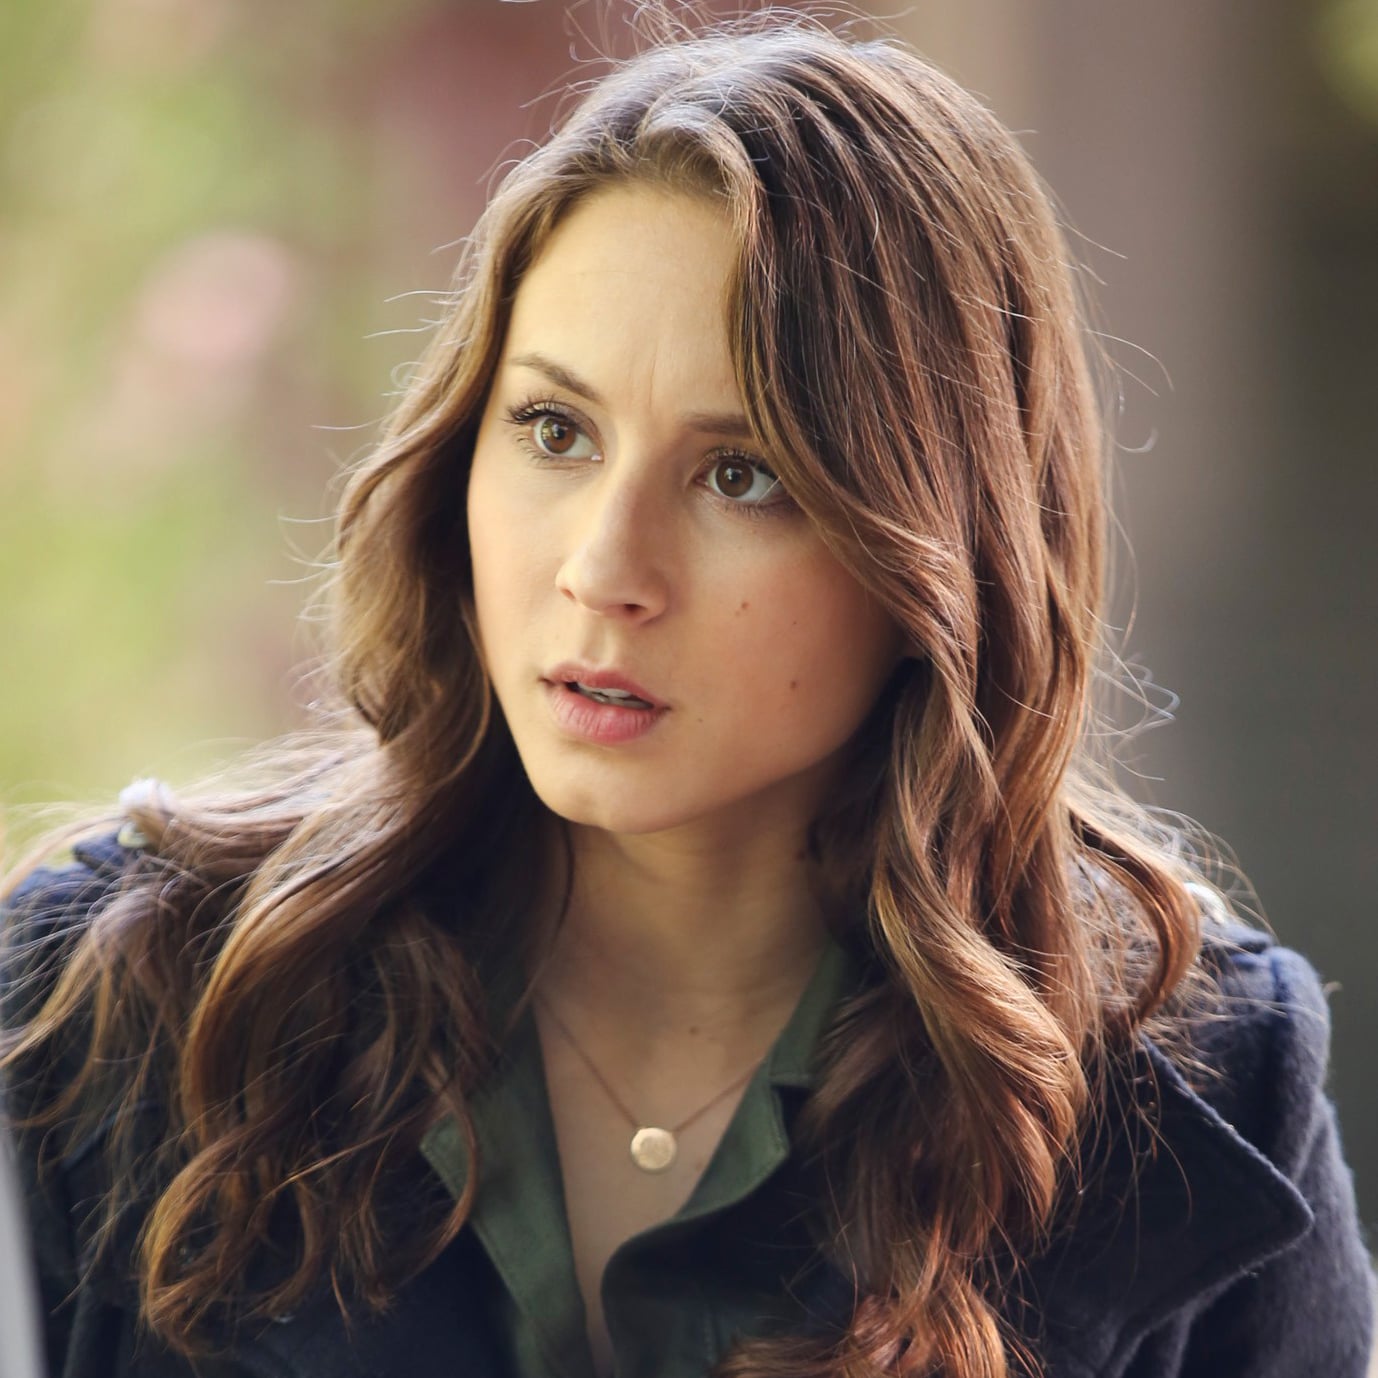 Spencer Pretty Little Liars Actress